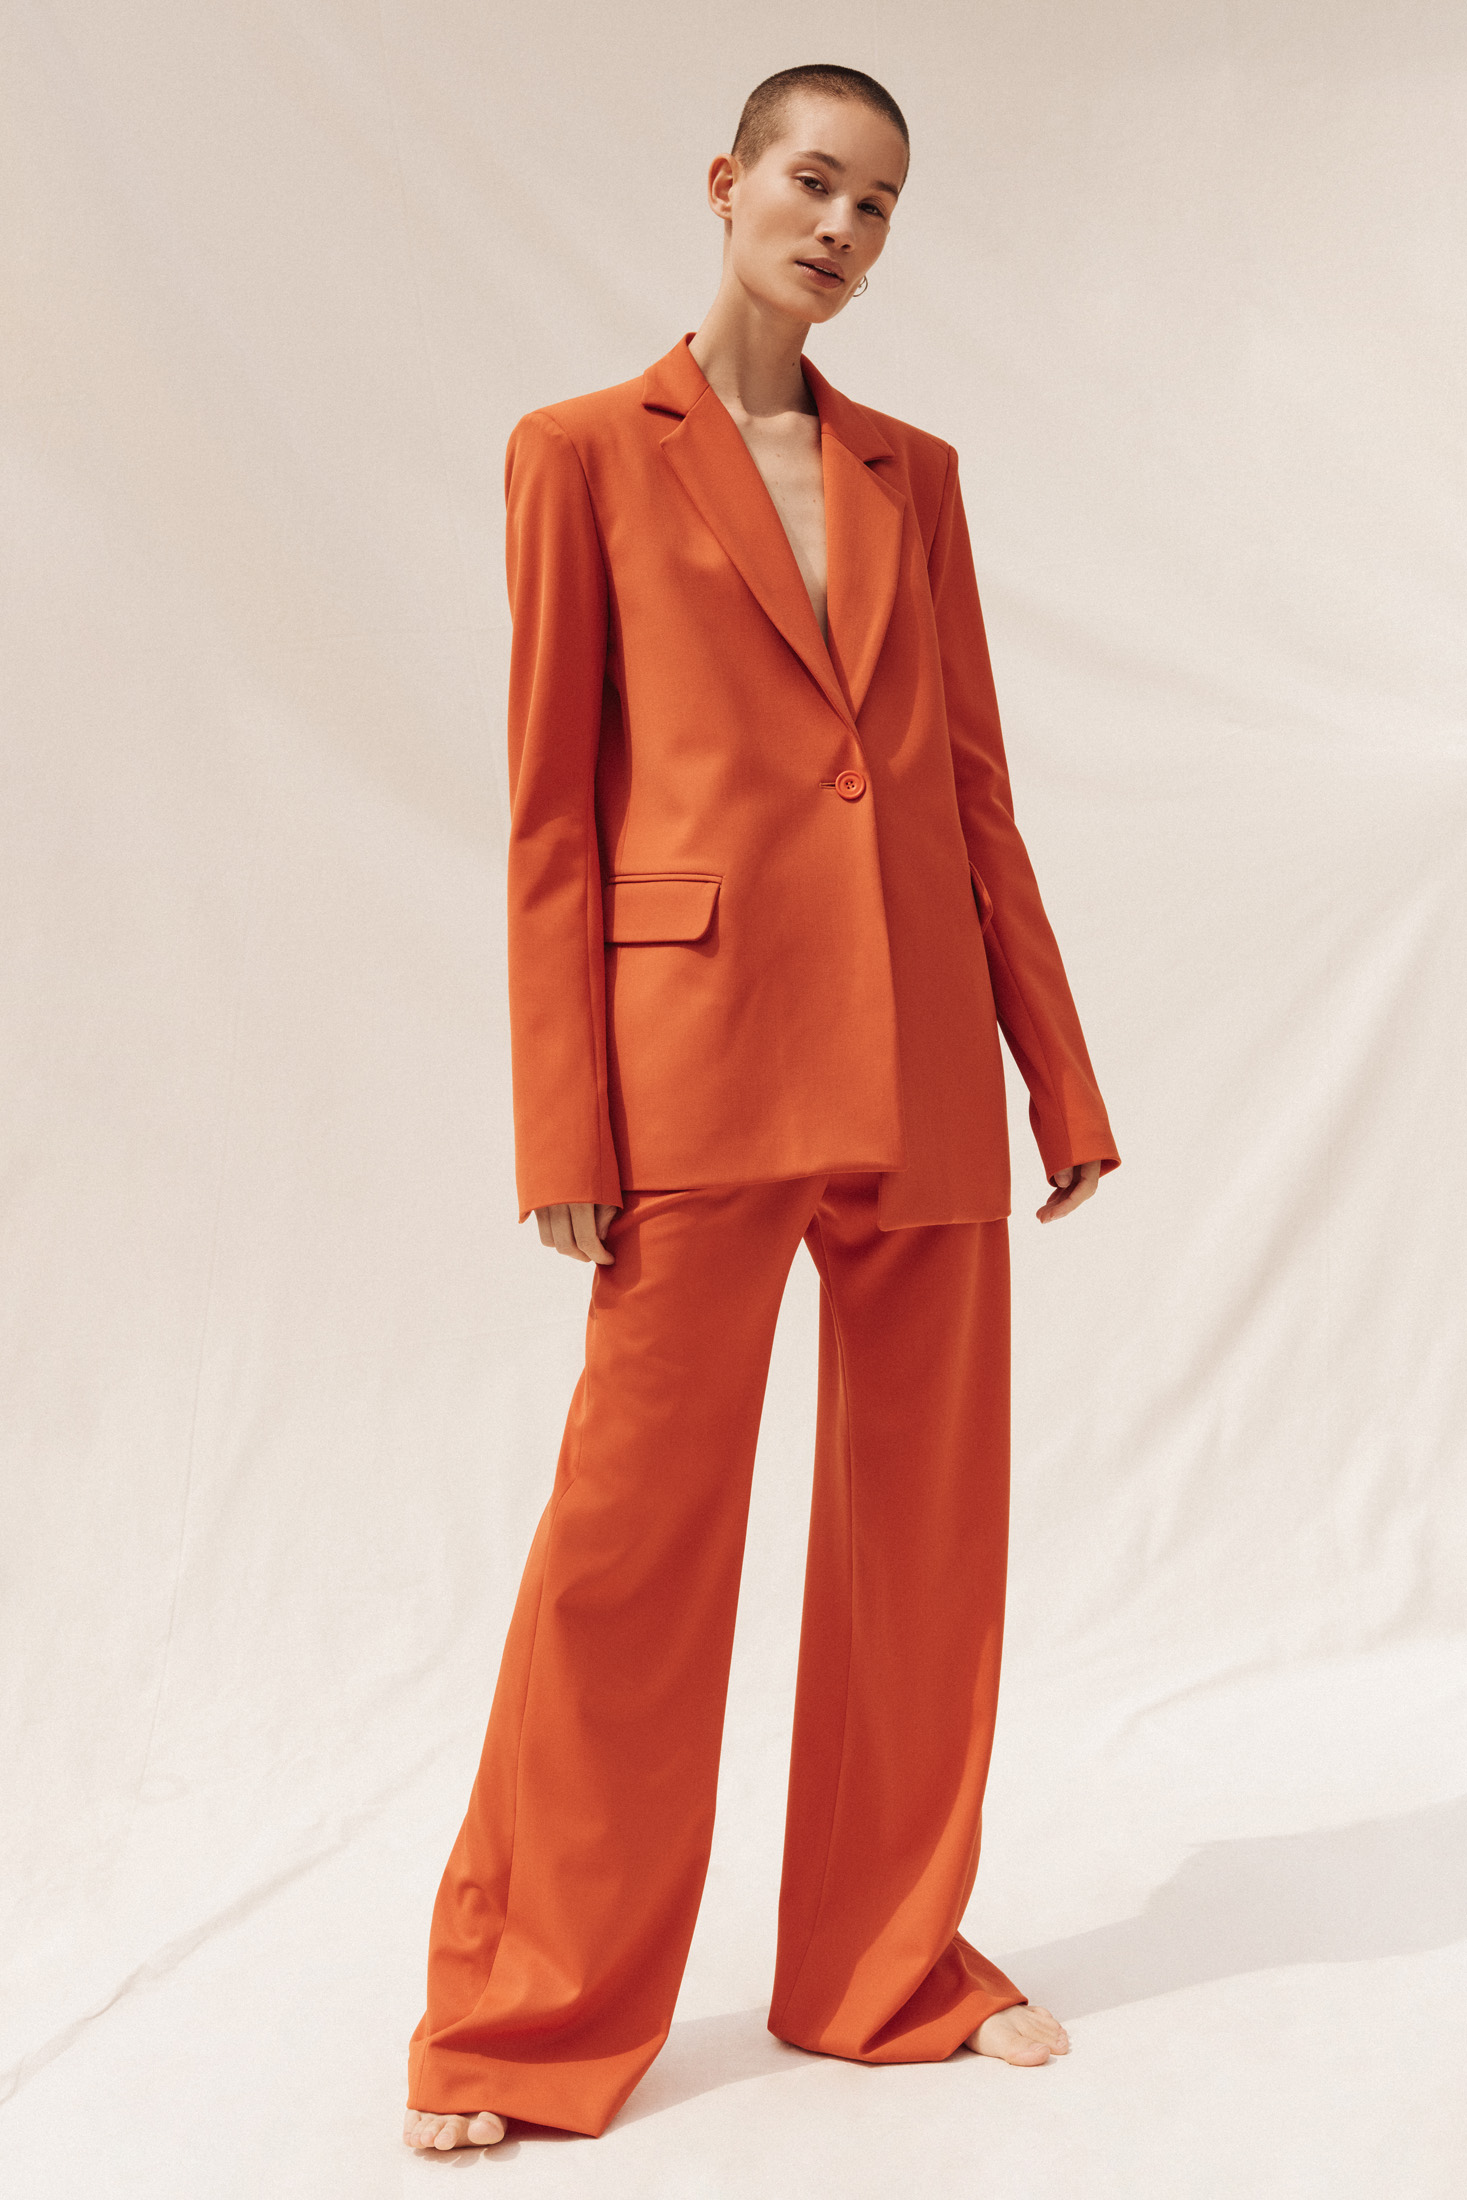 House of Holland’s Rainbow Suits | NUVO